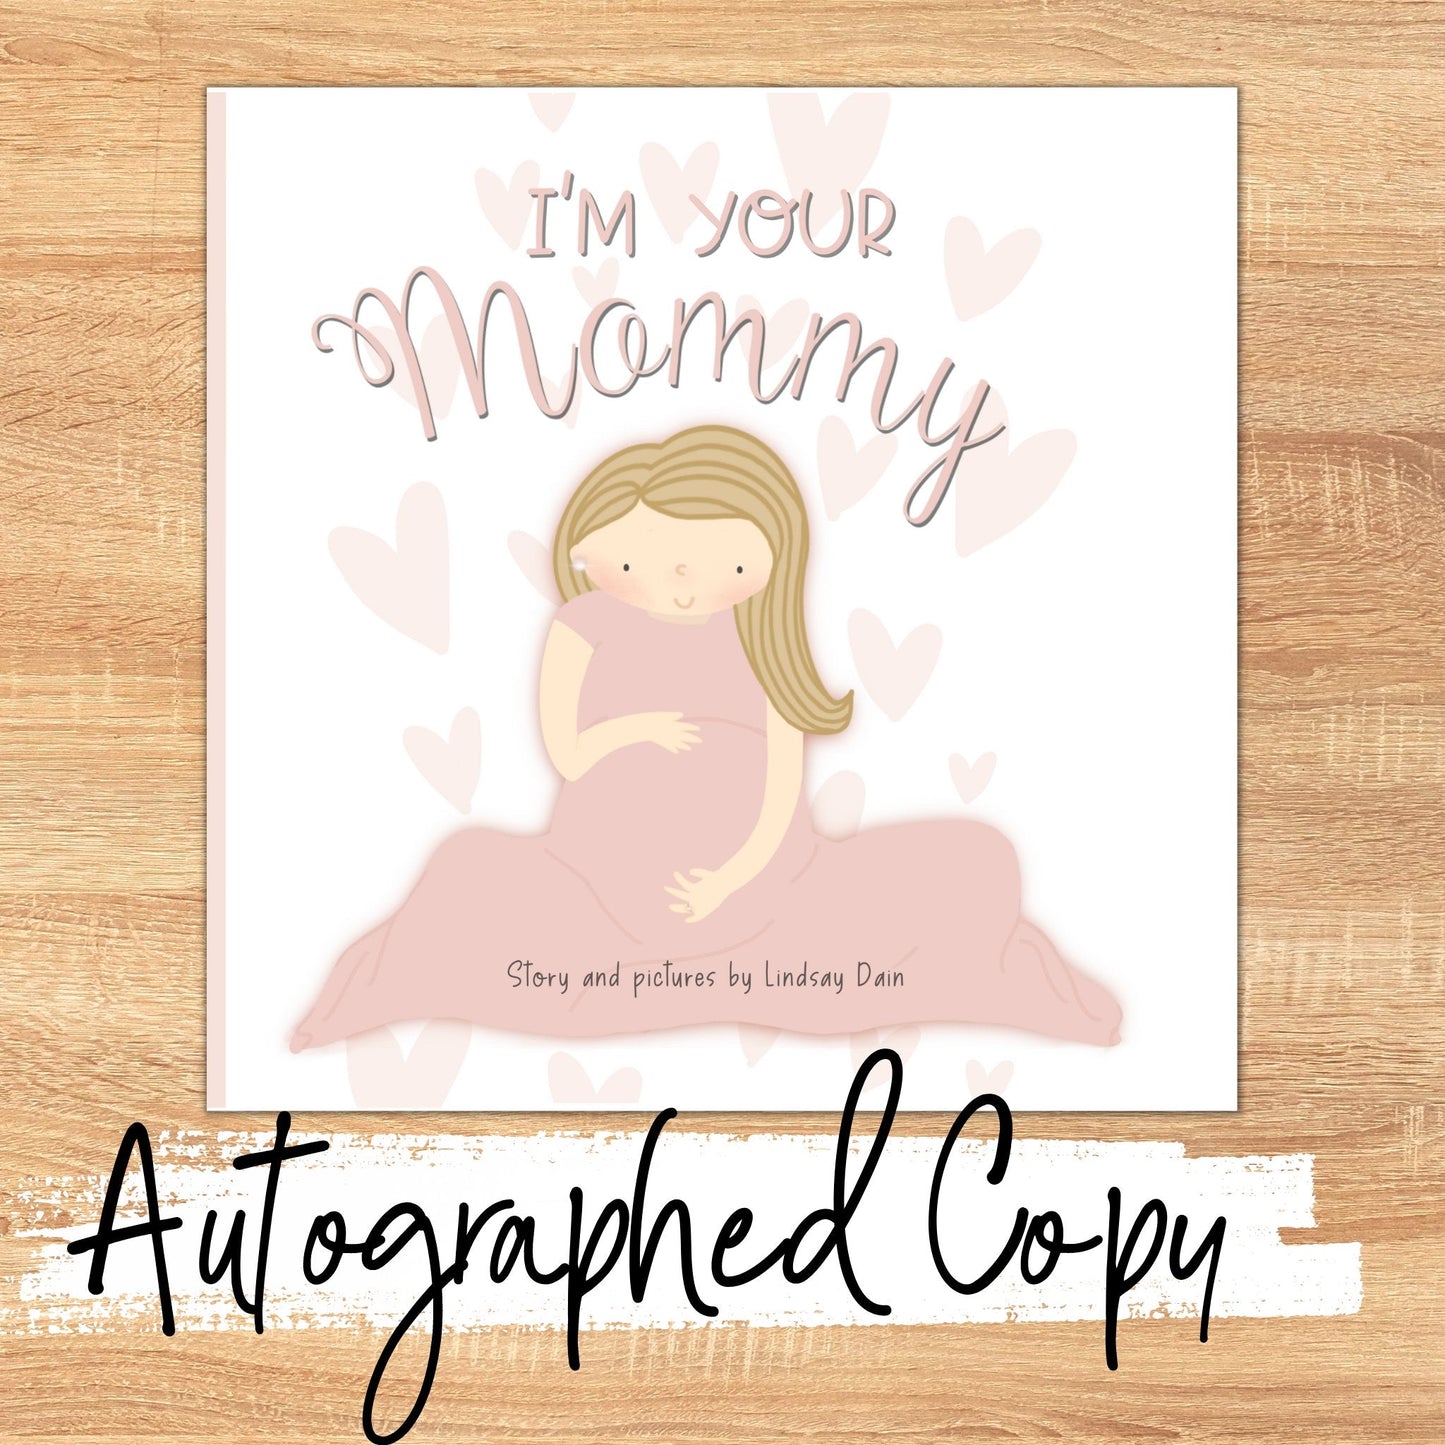 Autographed copy cover example of the children’s picture book called “I’m Your Mommy” that was self-published through Amazon’s Kindle Direct Publishing. 